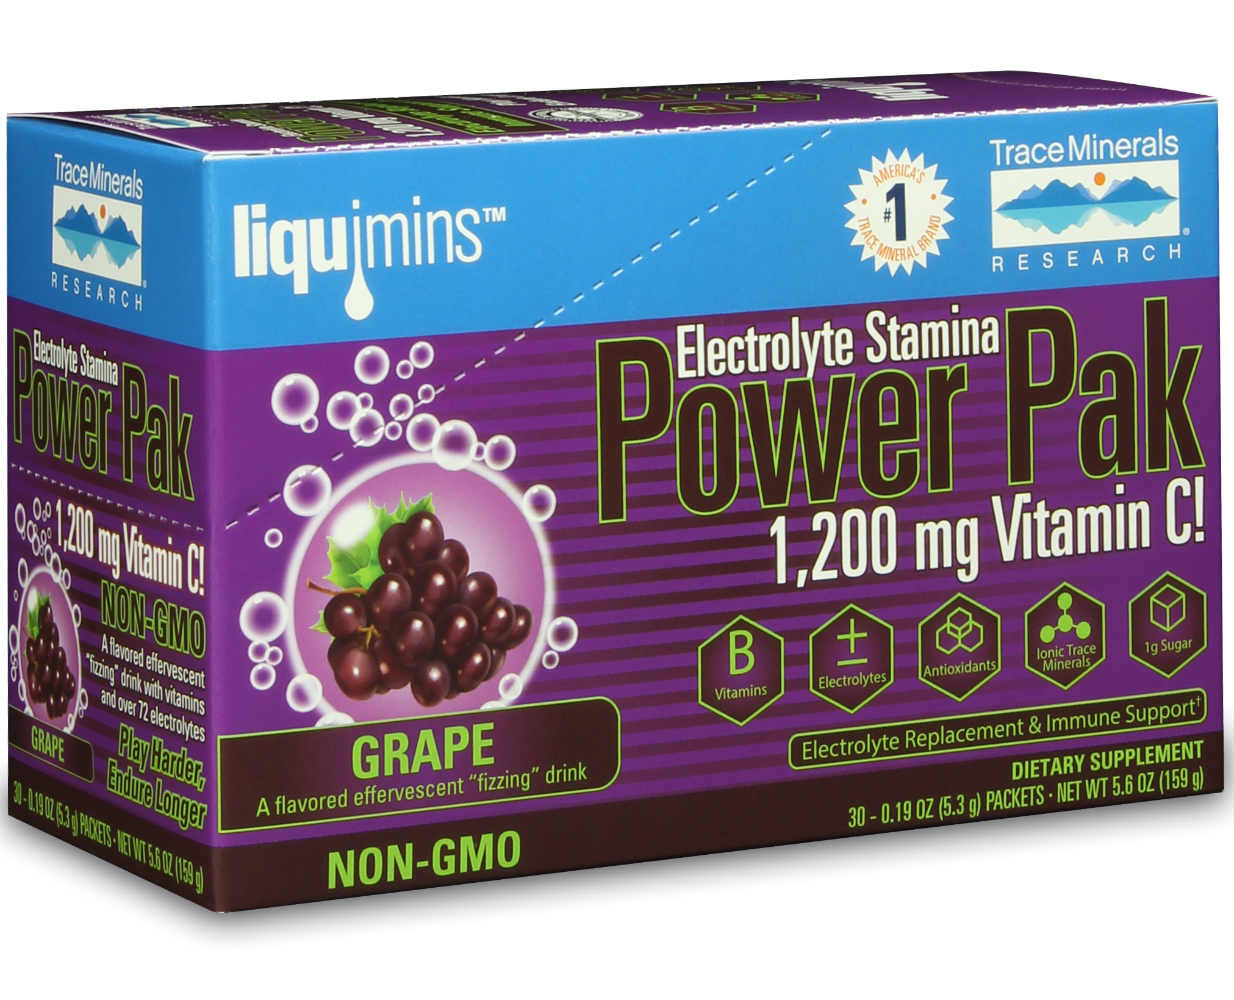 Trace Minerals Research: Electrolyte Stamina Power Pak Concord Grape 32 packets